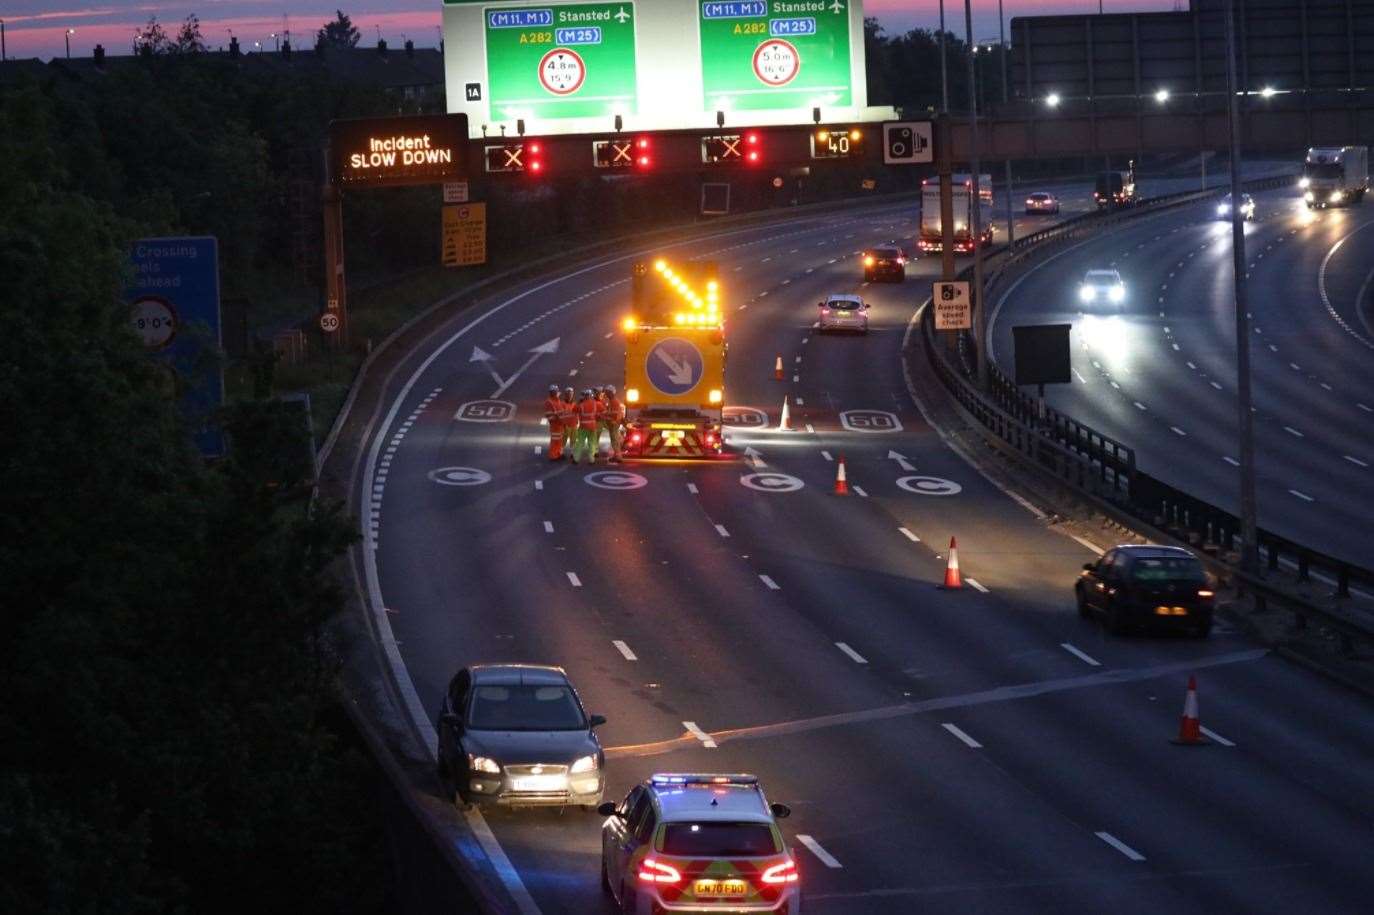 A car was abandoned near the Dartford Tunnel Picture: UKNIP